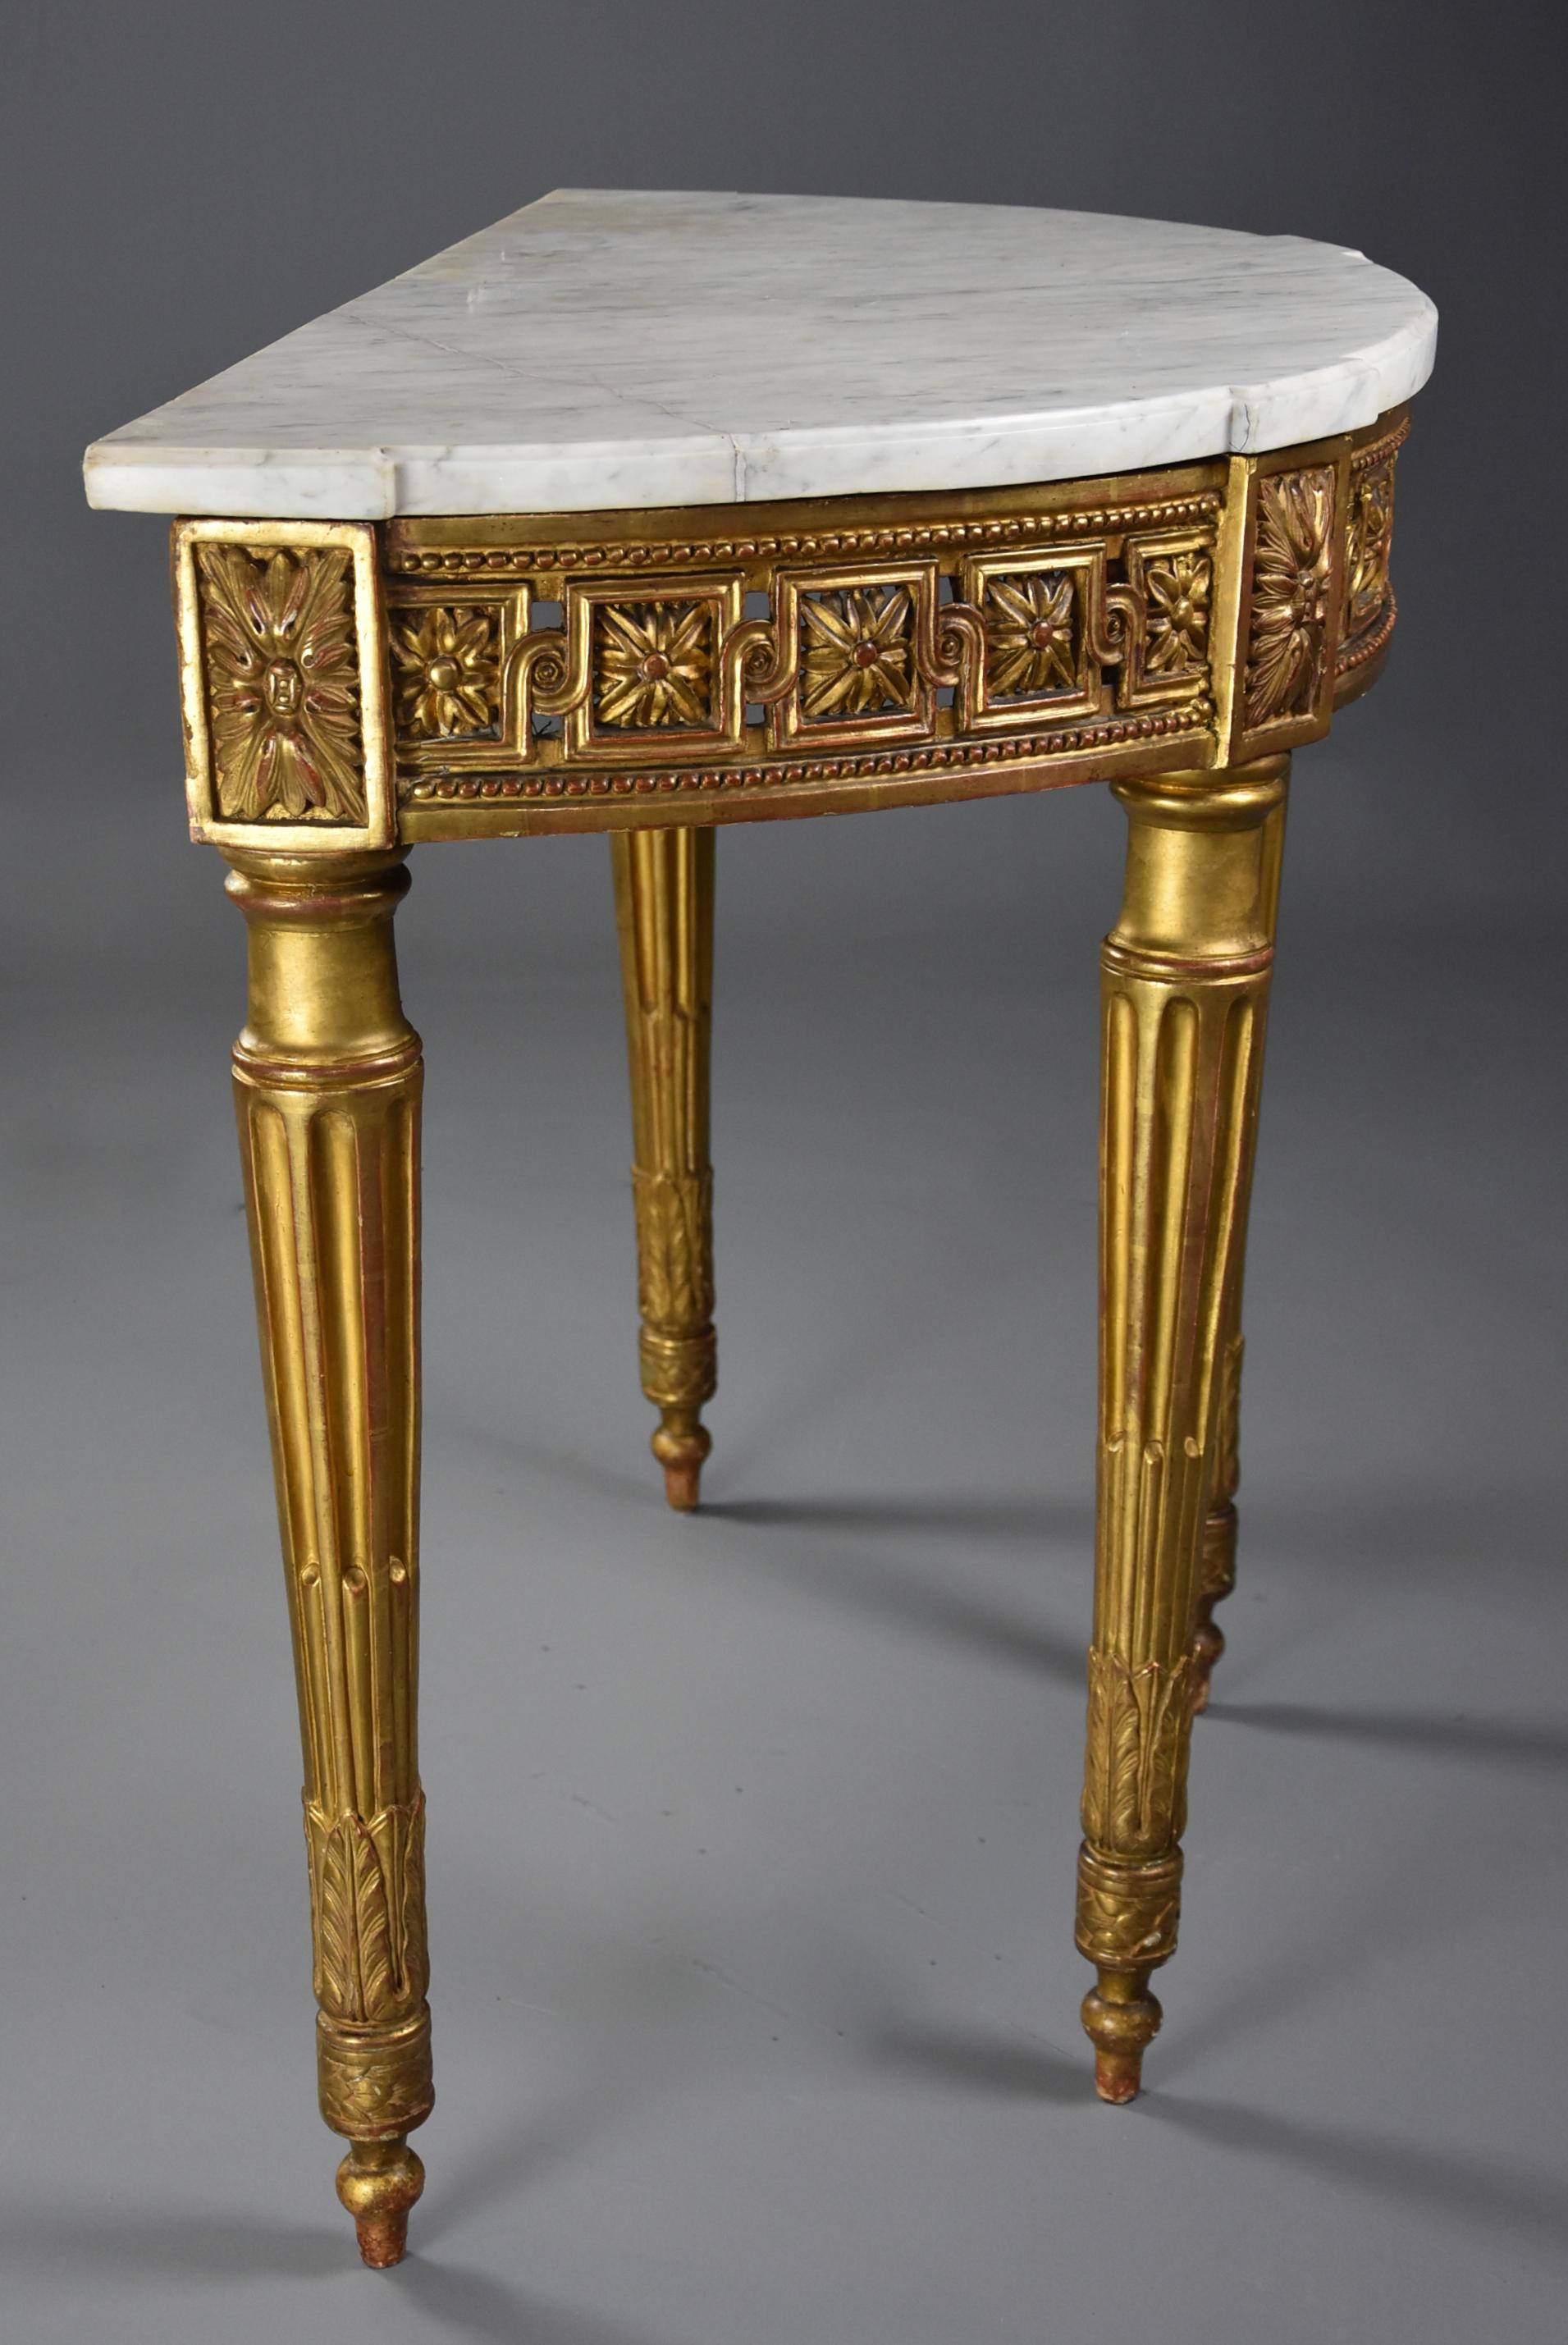 Highly Decorative 19th Century French Demilune Gilt Console Table For Sale 5